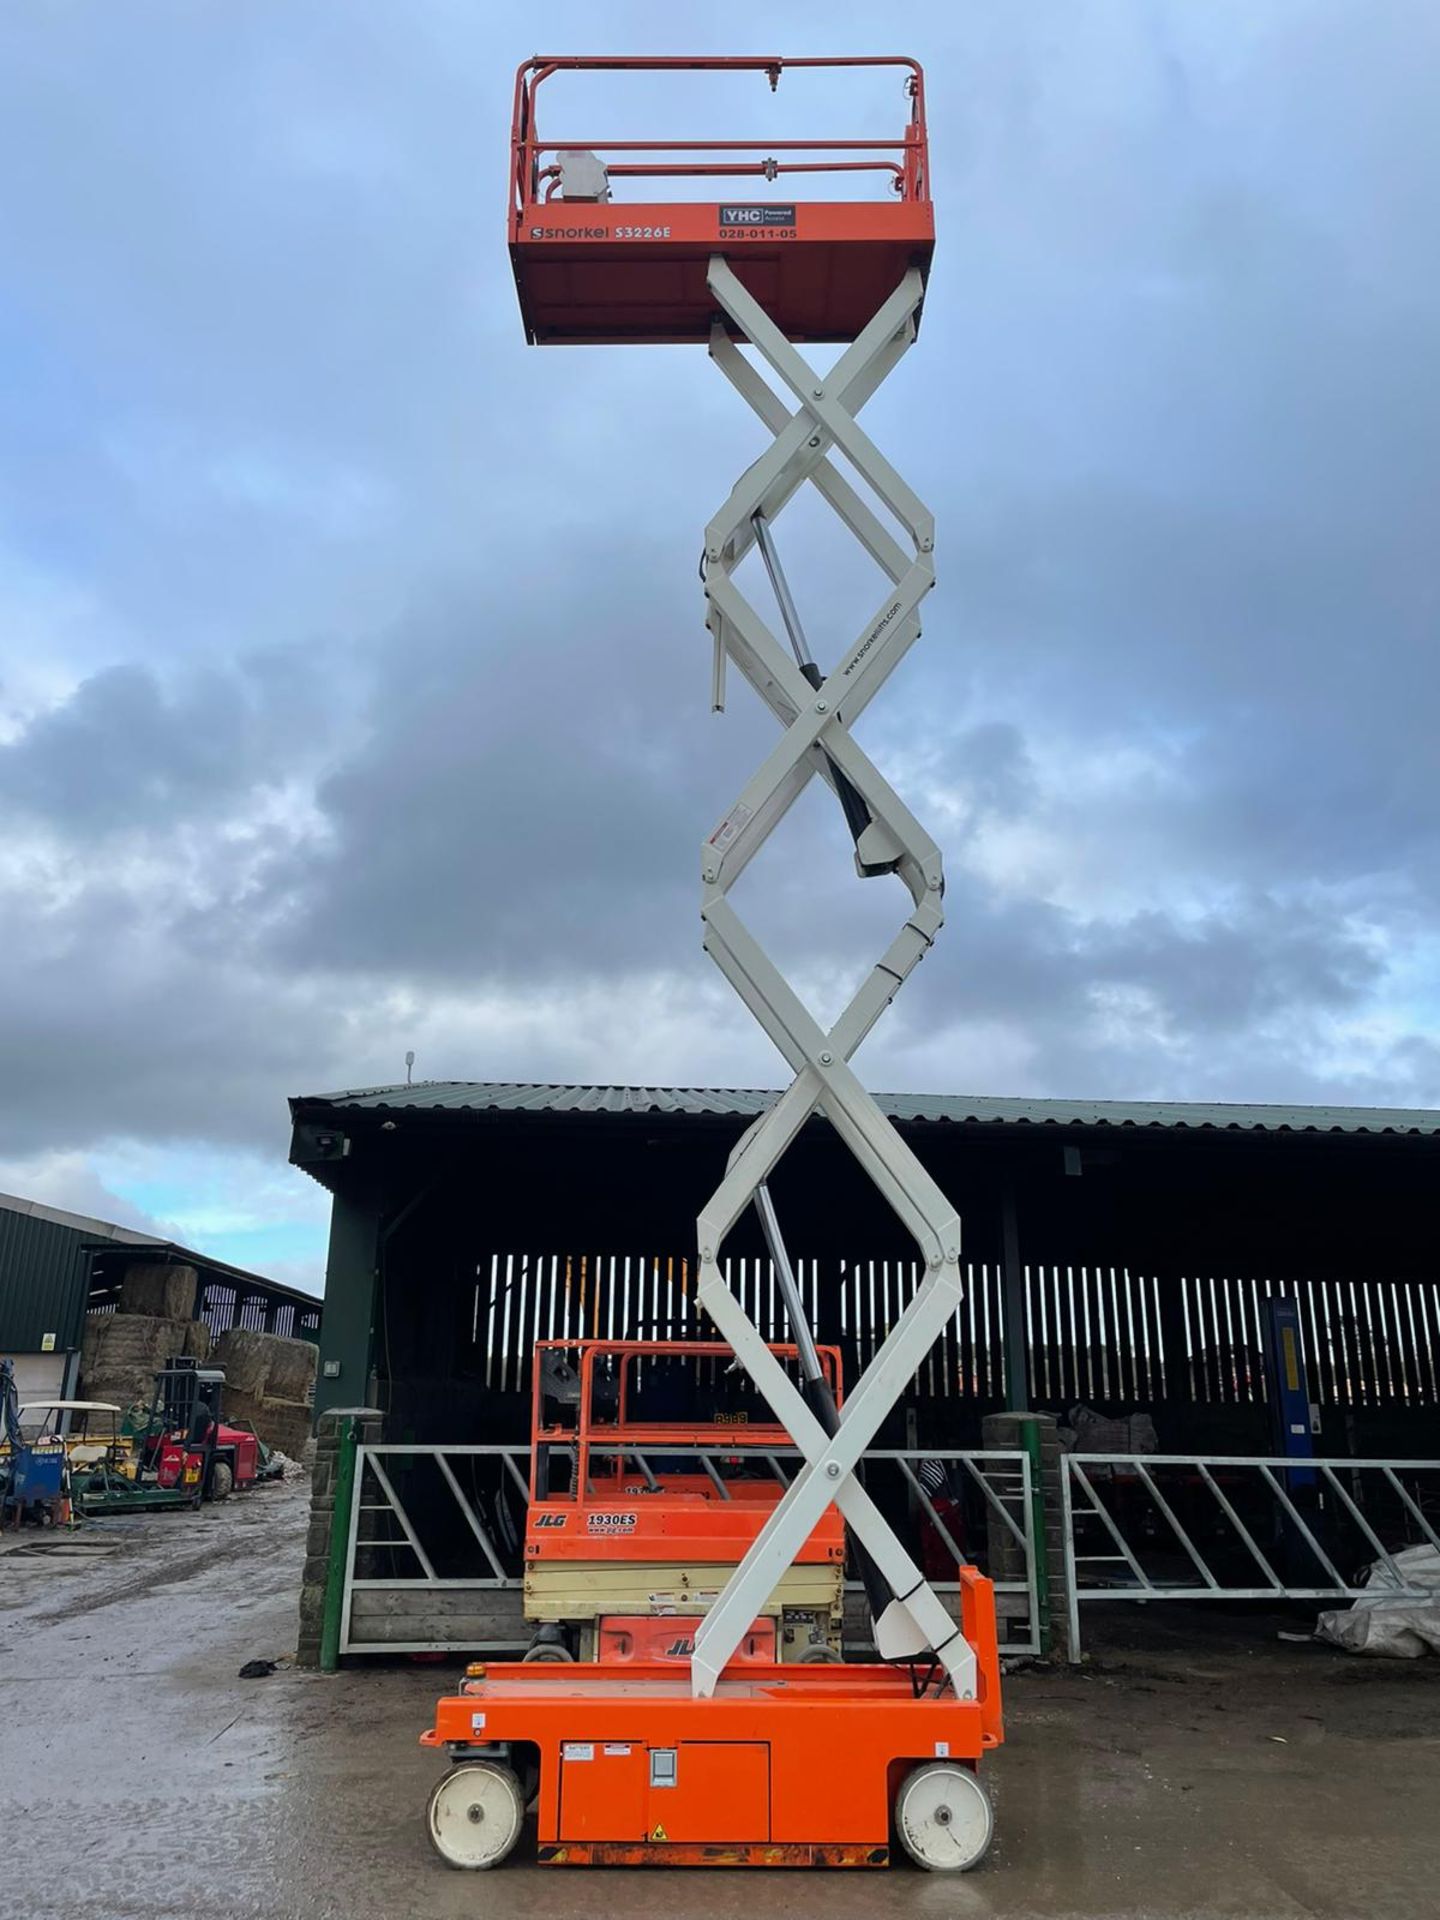 2018 SNORKEL S3226E ELECTRIC SCISSOR LIFT, DRIVES AND LIFTS, CLEAN MACHINE, EX DEMO CONDITION - Image 5 of 6